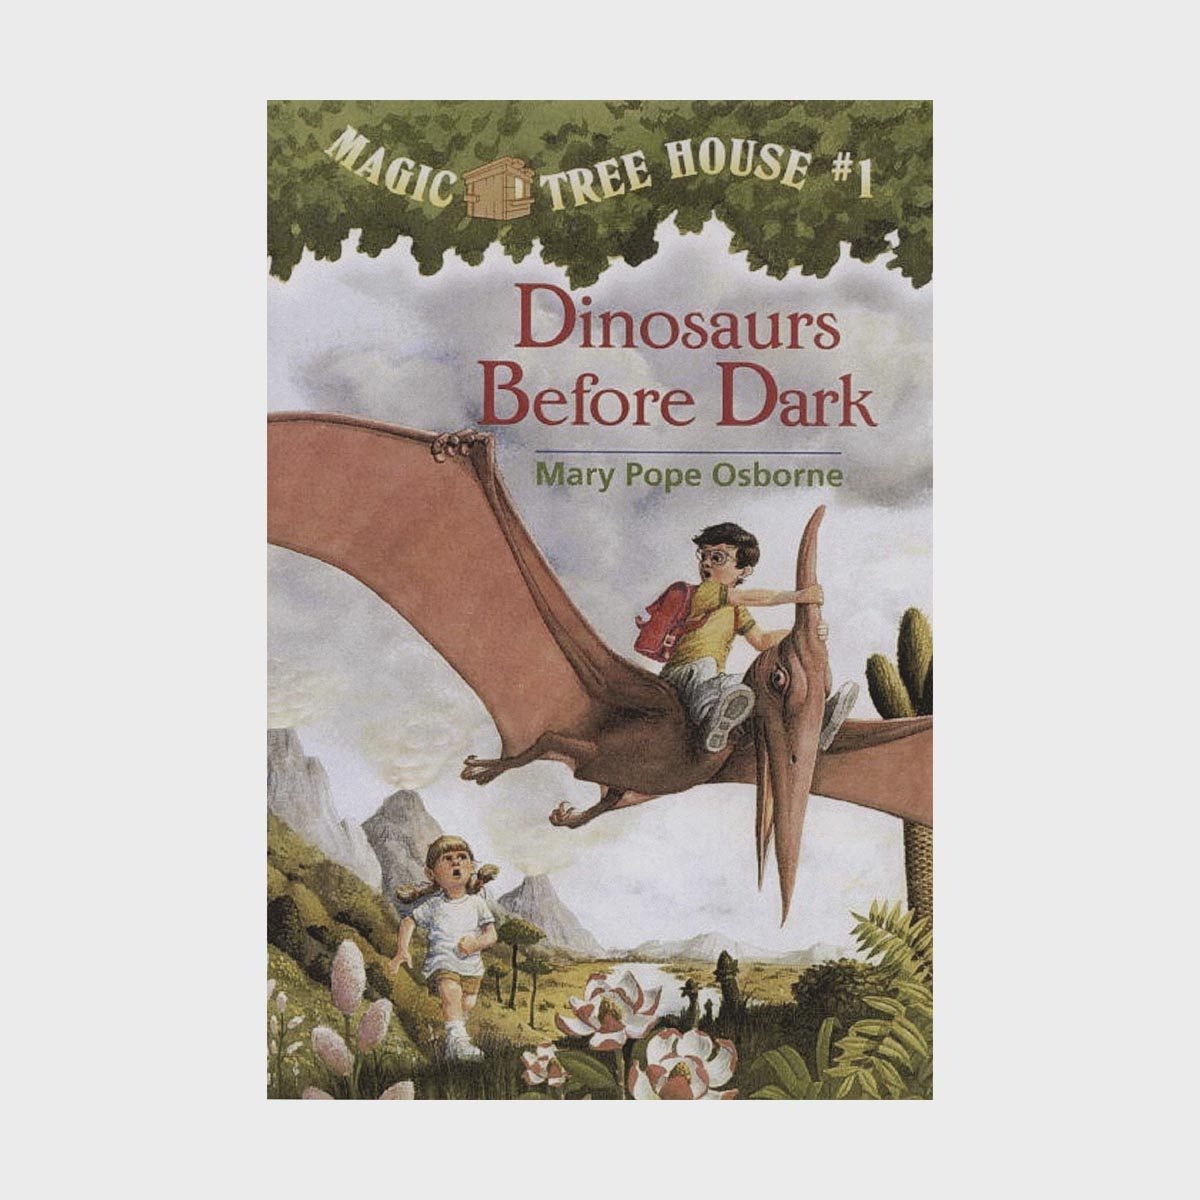 How to Read the Magic Tree House Books in Order